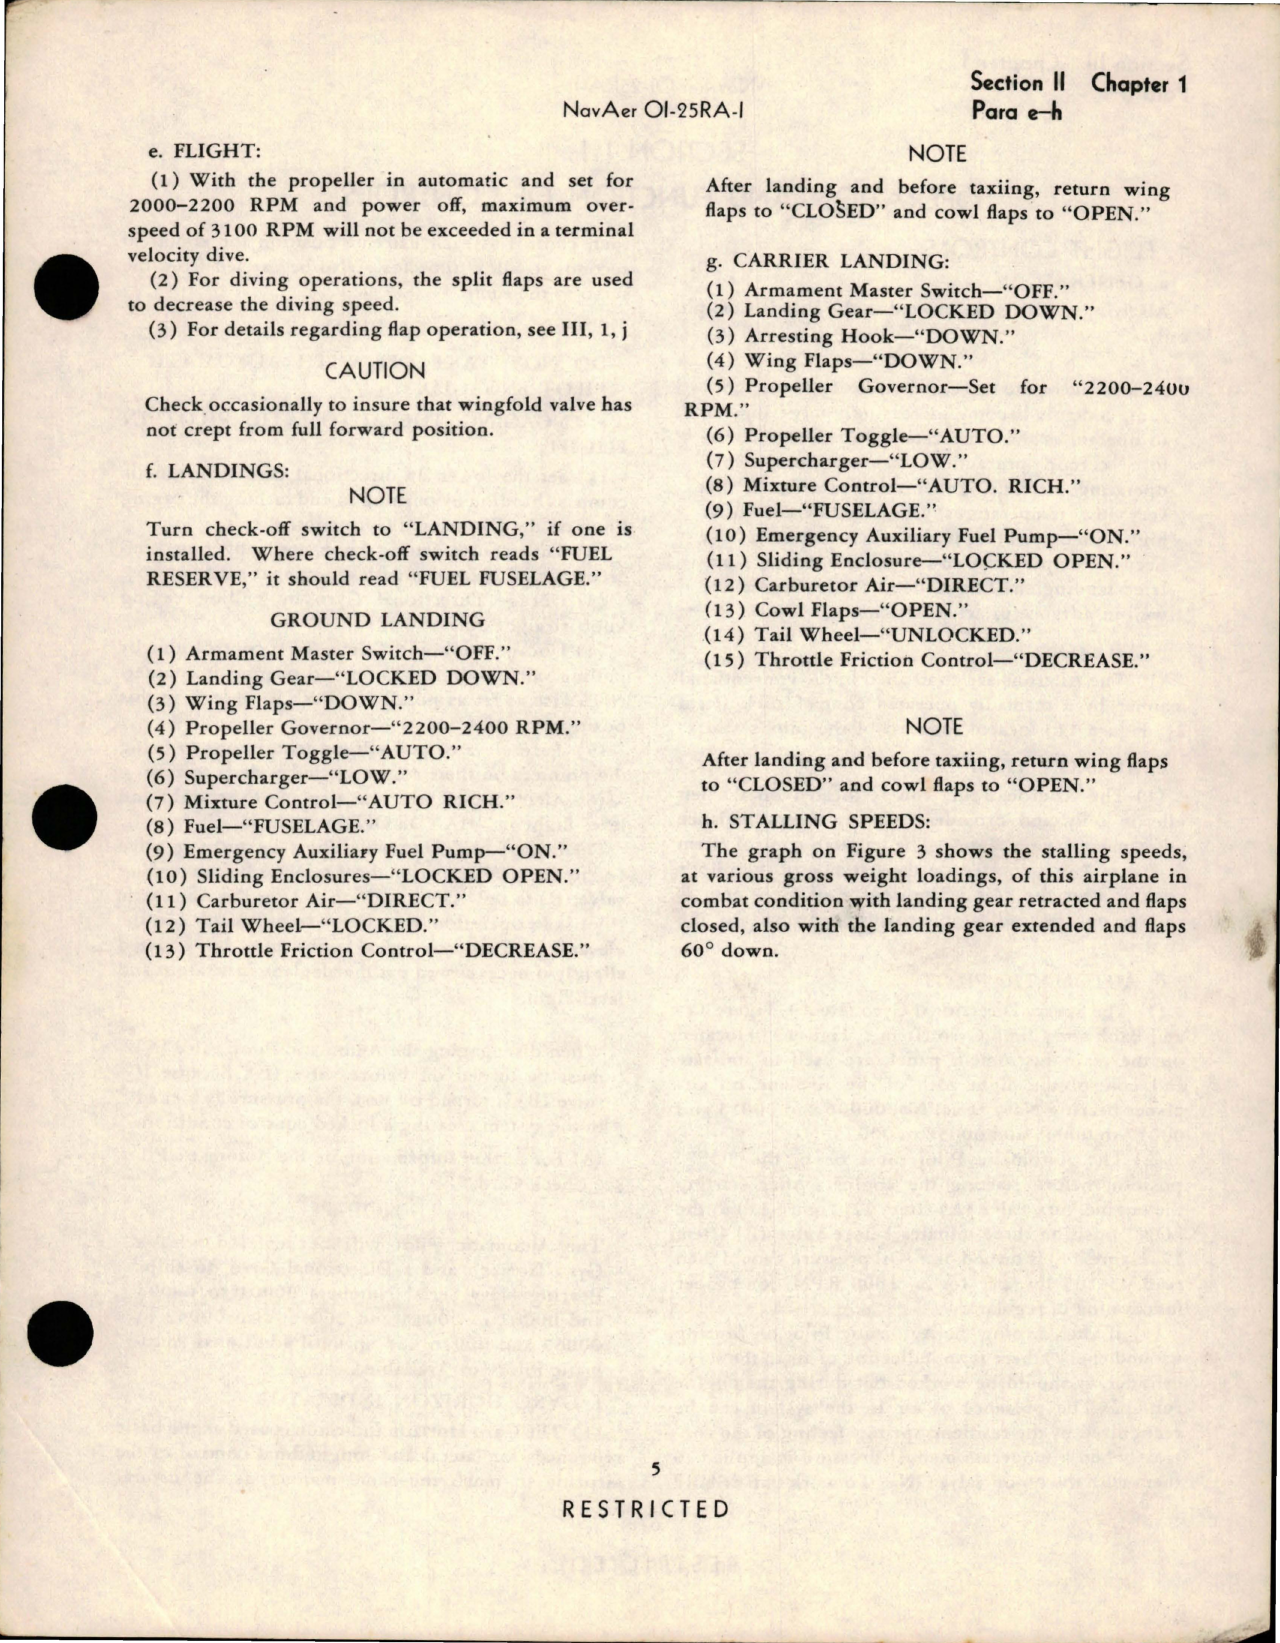 Sample page 9 from AirCorps Library document: Pilot's Handbook of Flight Operating Instructions for SB2C-1, SB2C-1C, SB2C-3, SBF-1, SBF-2, SBW-1, SBW-2 and Helldiver